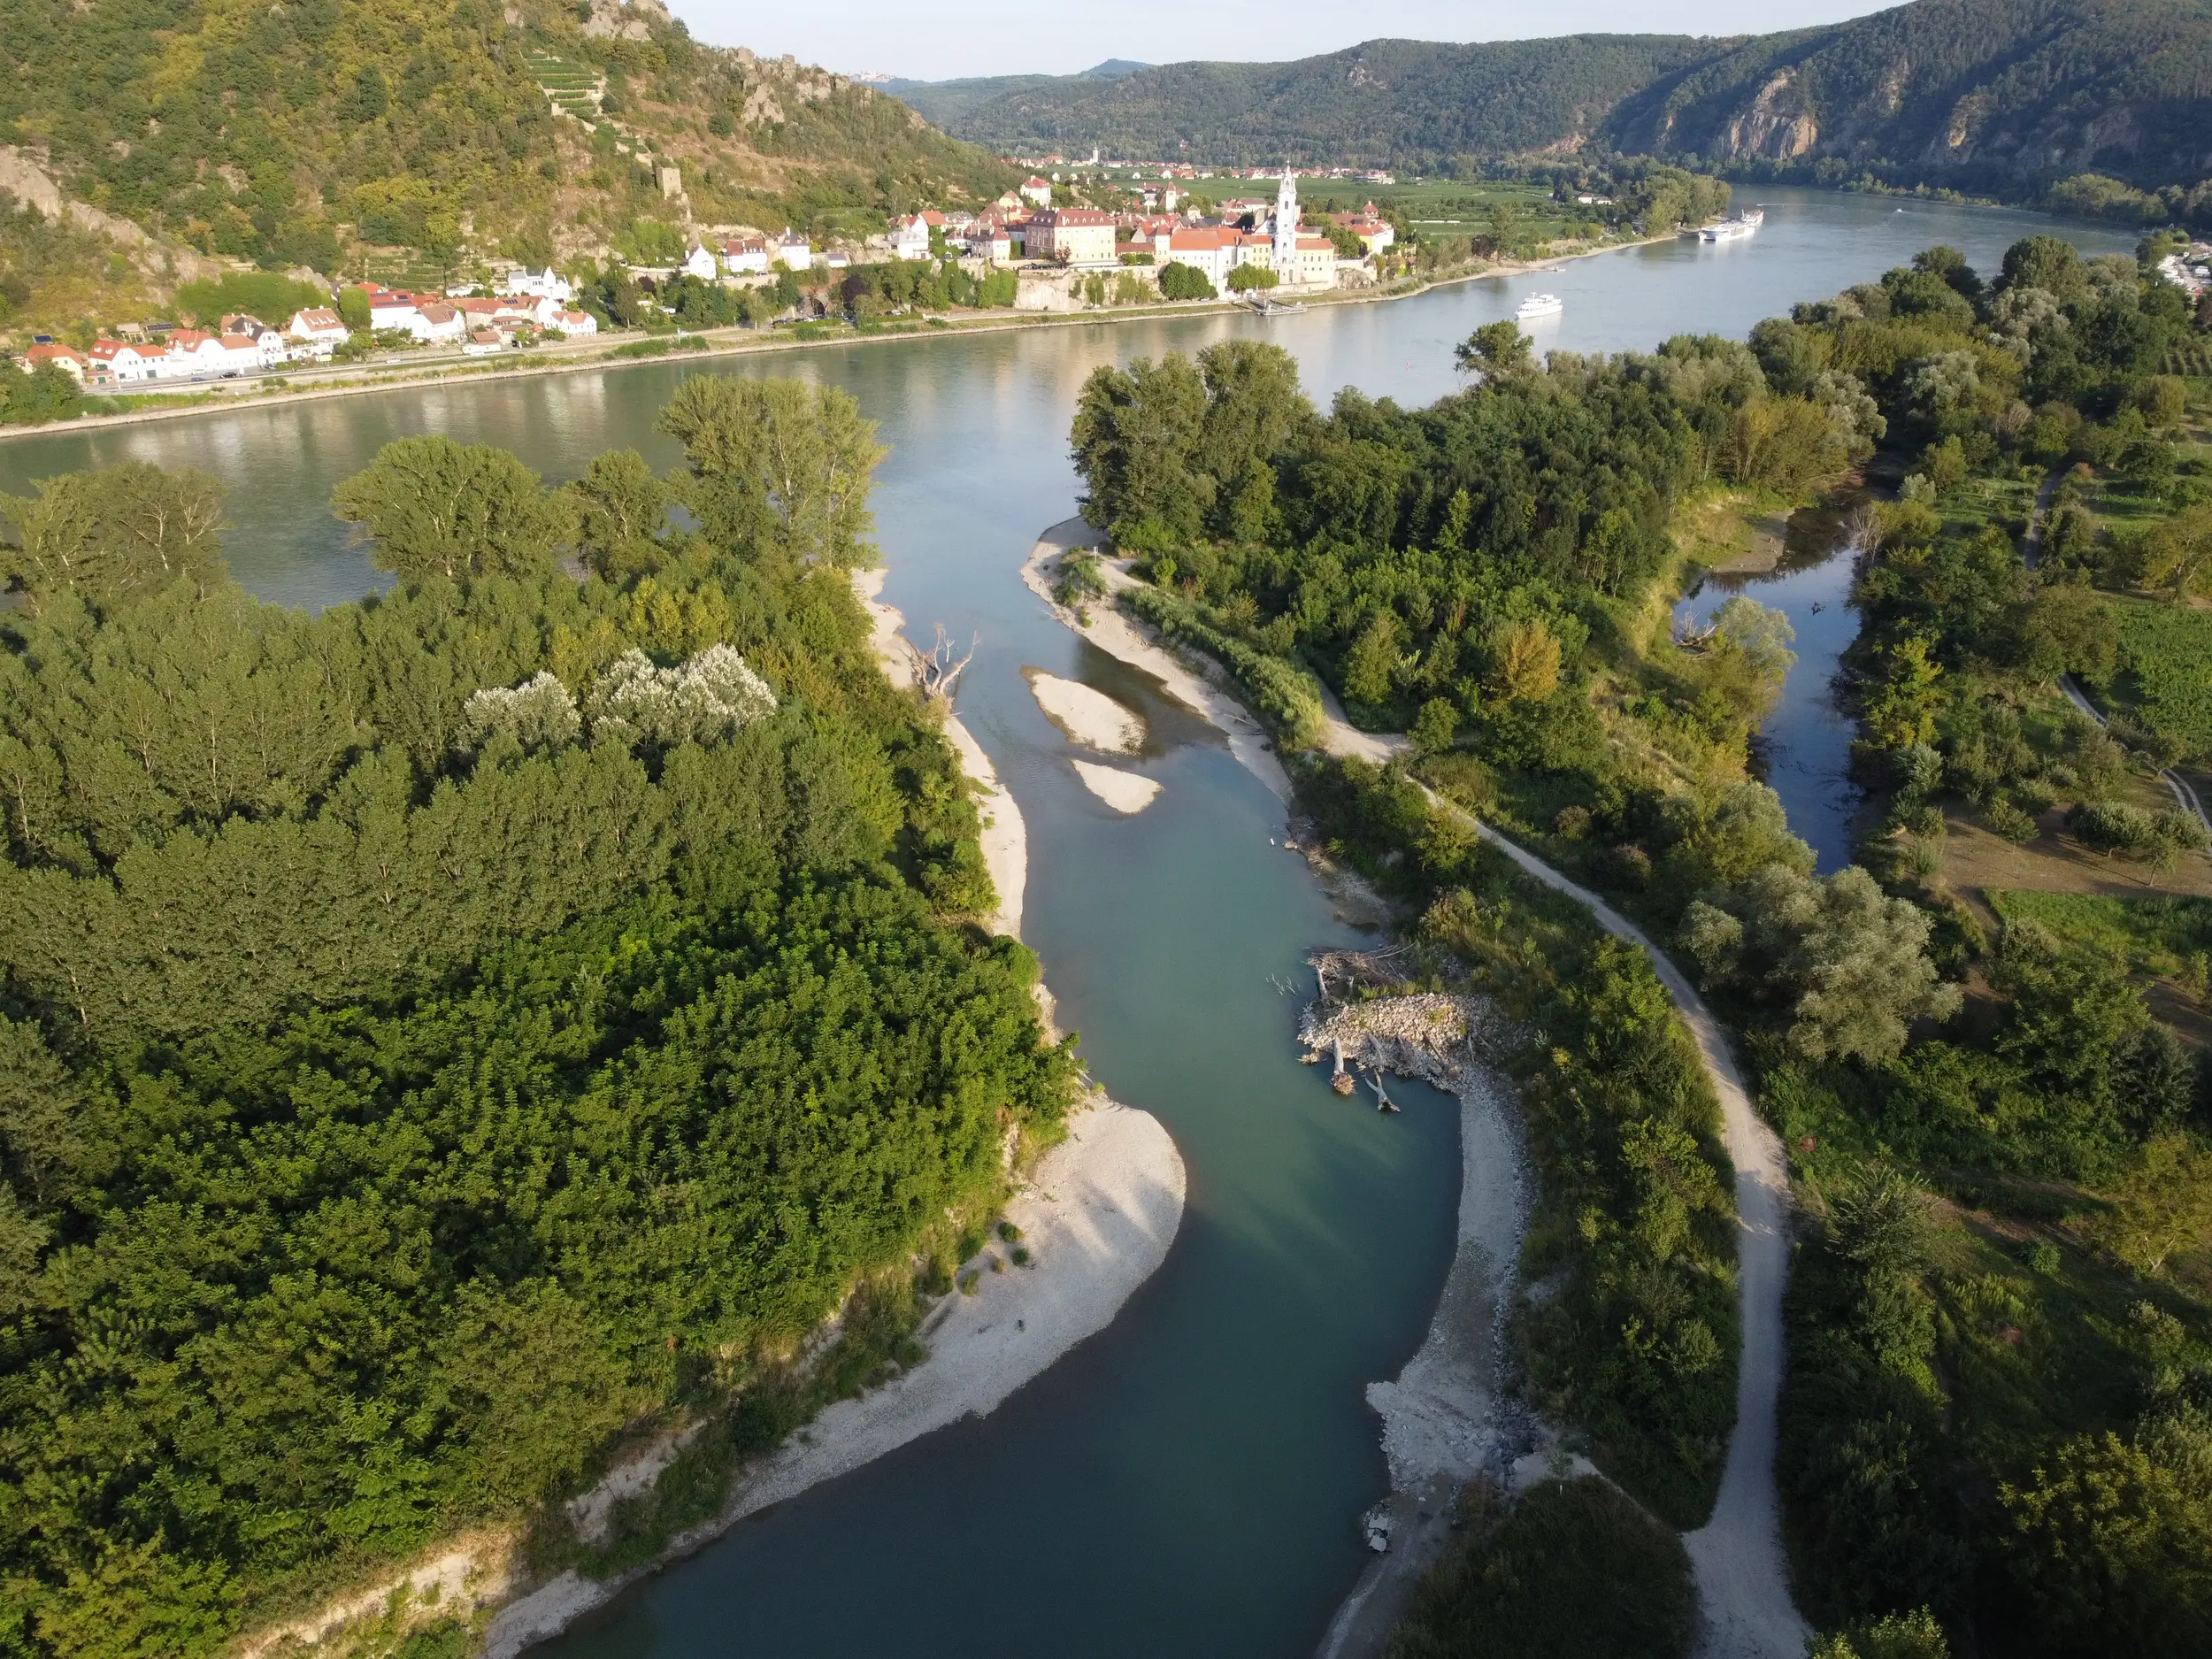 Drone image of the outflow of the new side arm of the Auenwildnis into the Danube near Dürnstein